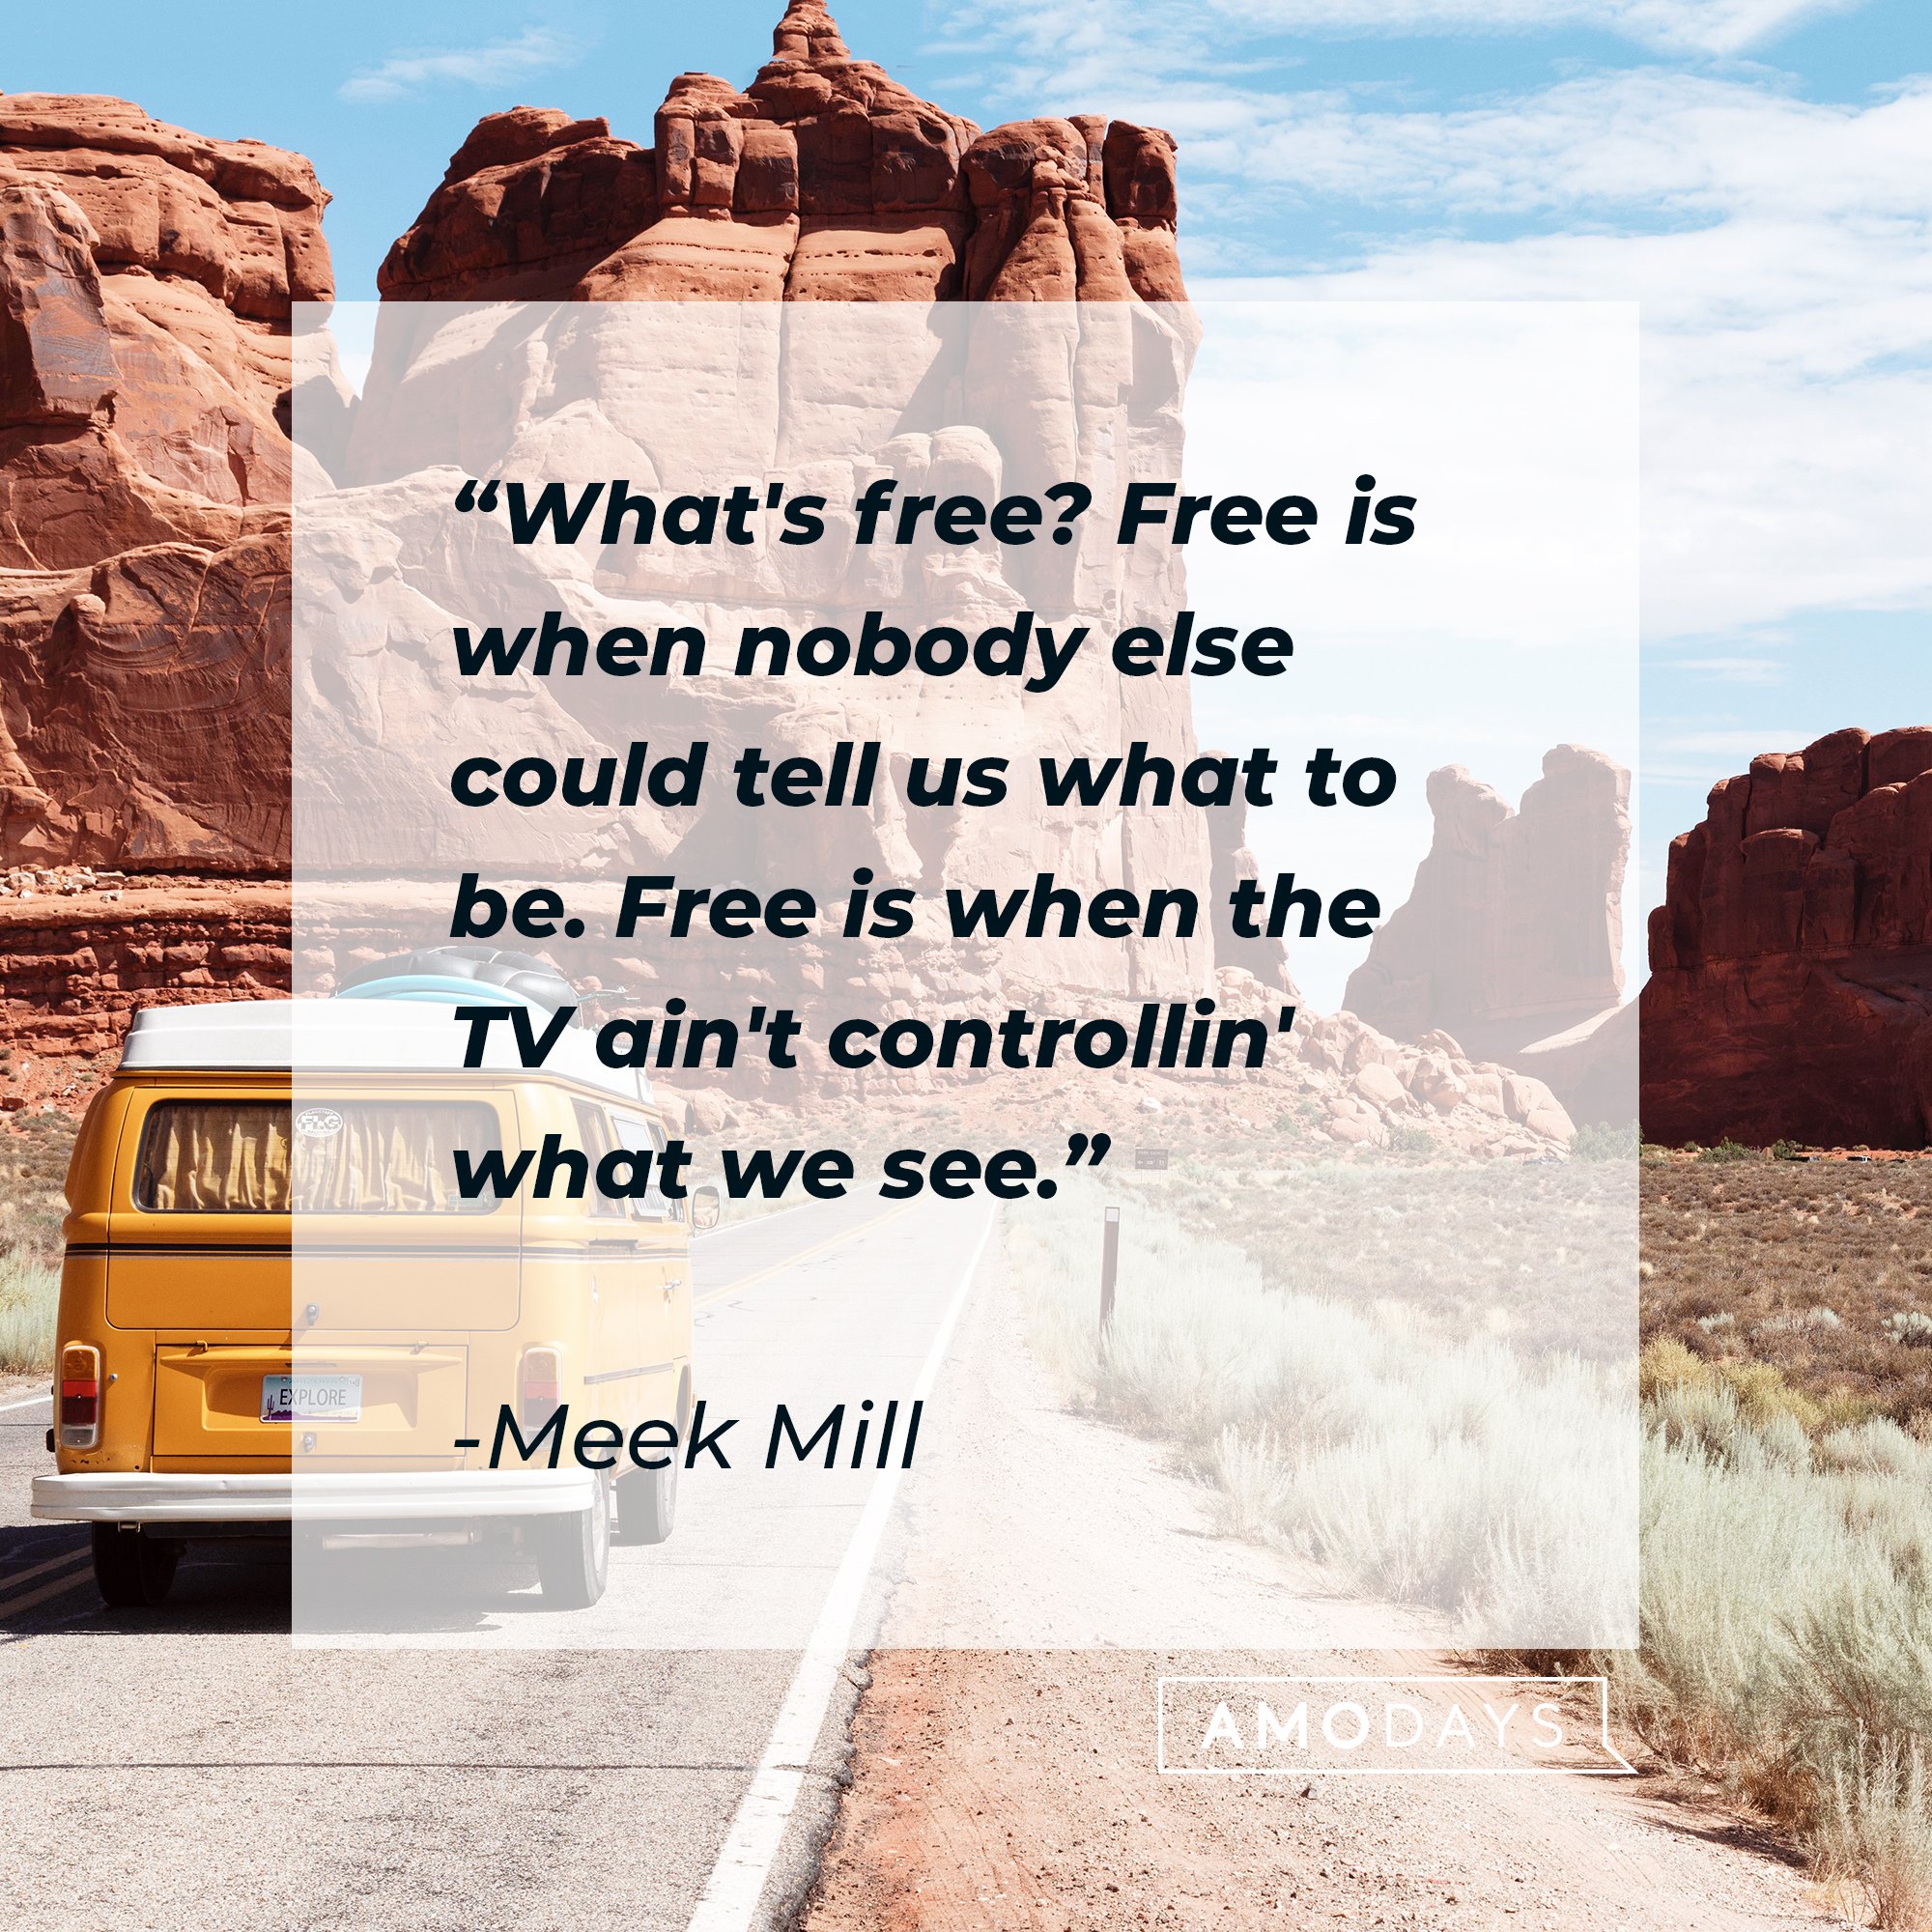 Meek Mill’s quote: "What's free? Free is when nobody else could tell us what to be. Free is when the TV ain't controllin' what we see." | Image: AmoDays